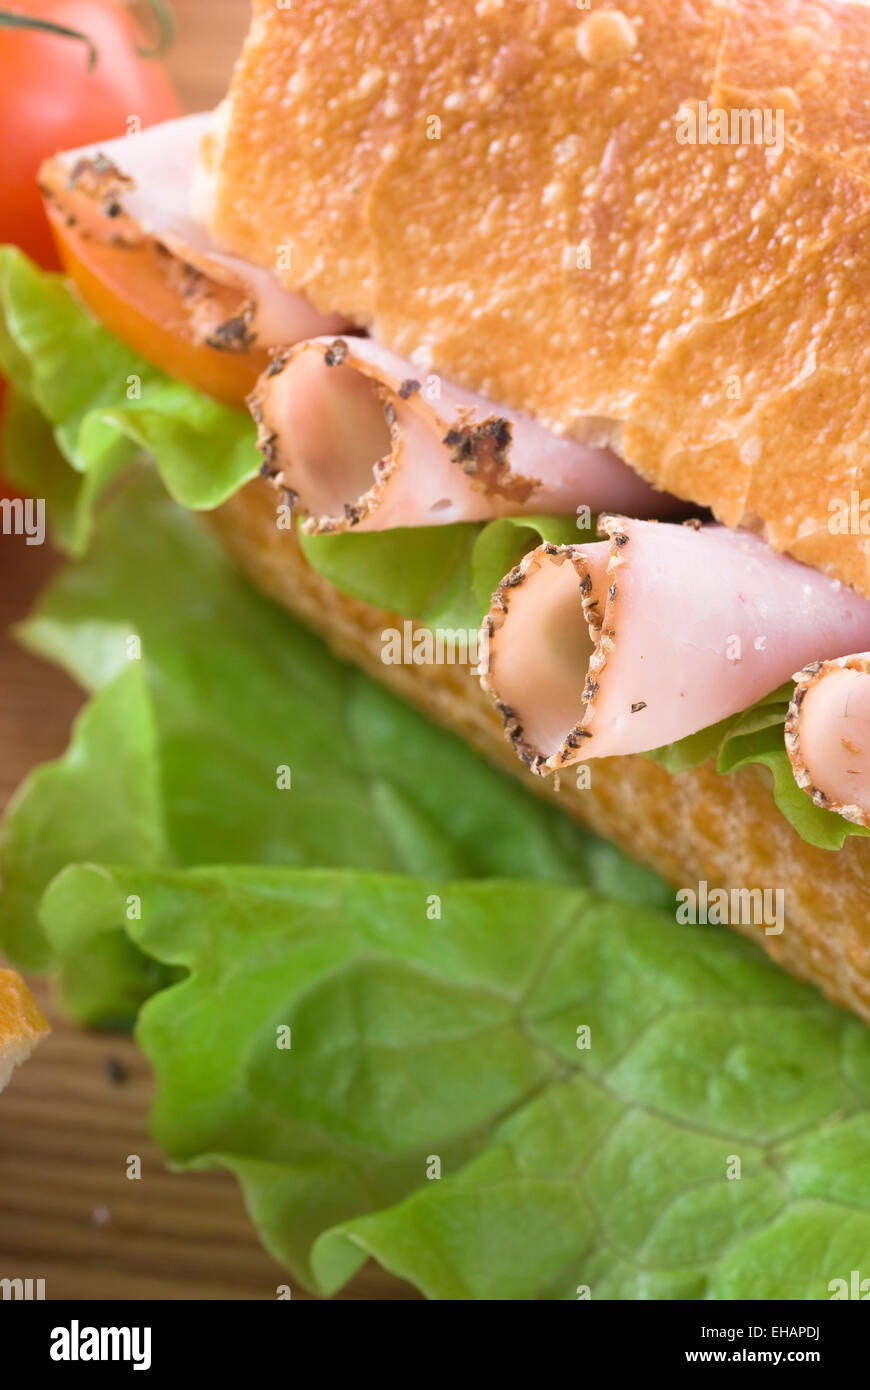 Baguette with pastrami/ham, lettuce and tomato. Stock Photo